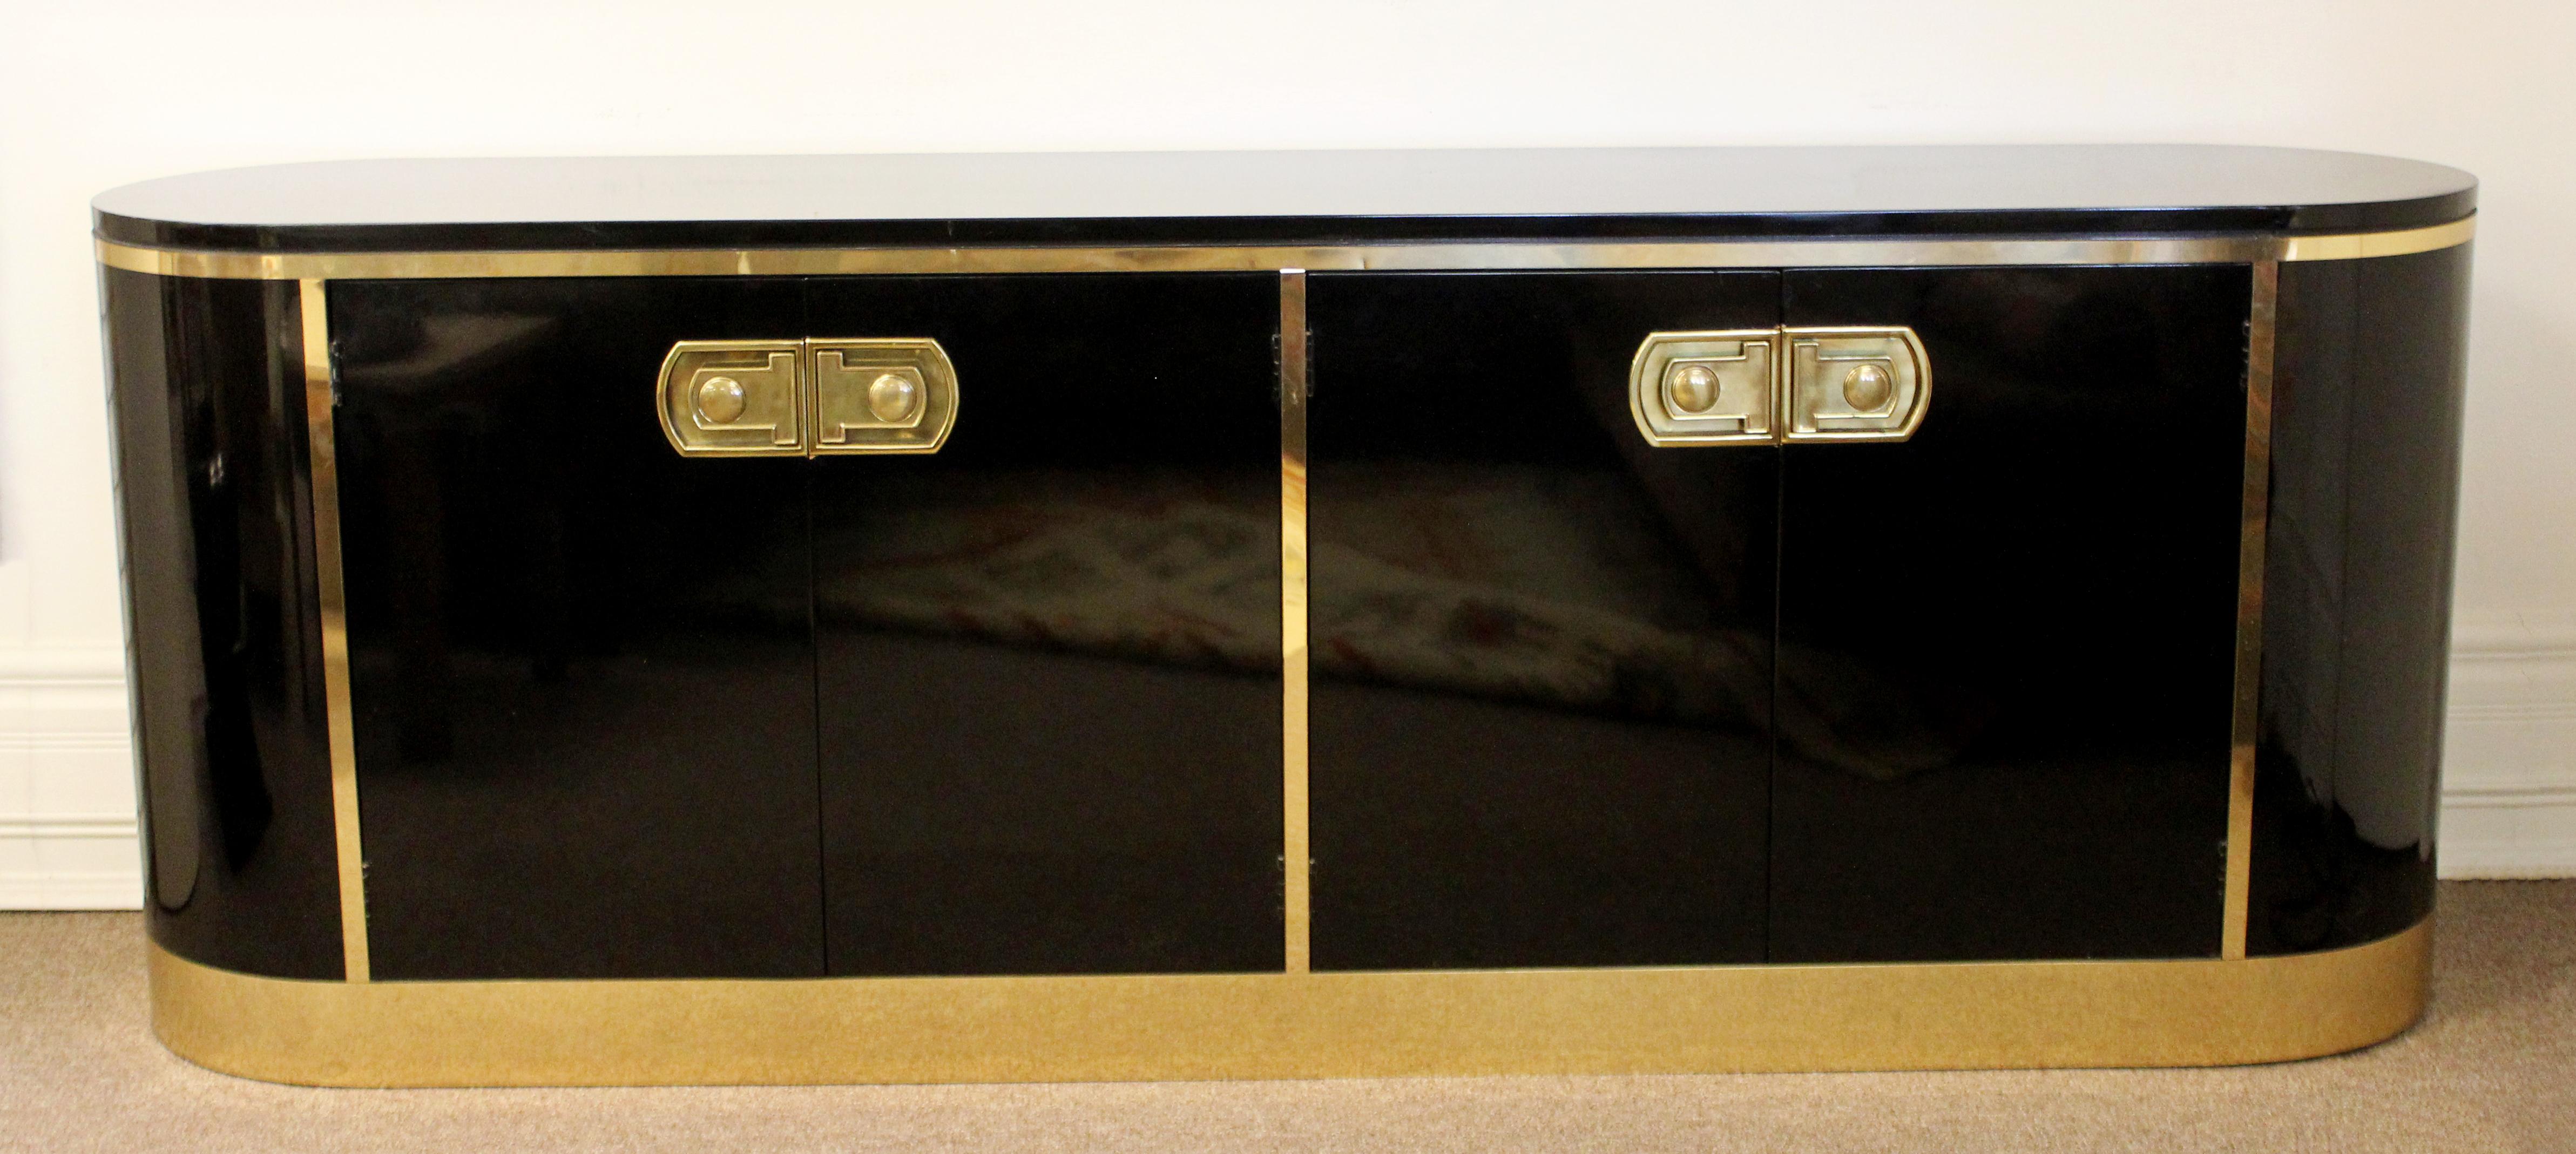 For your consideration is a ravishing, black lacquer credenza, with brass pulls and trims, with four drawers and a shelf, from Mastercraft, circa 1970s. In excellent vintage condition. The dimensions are 80